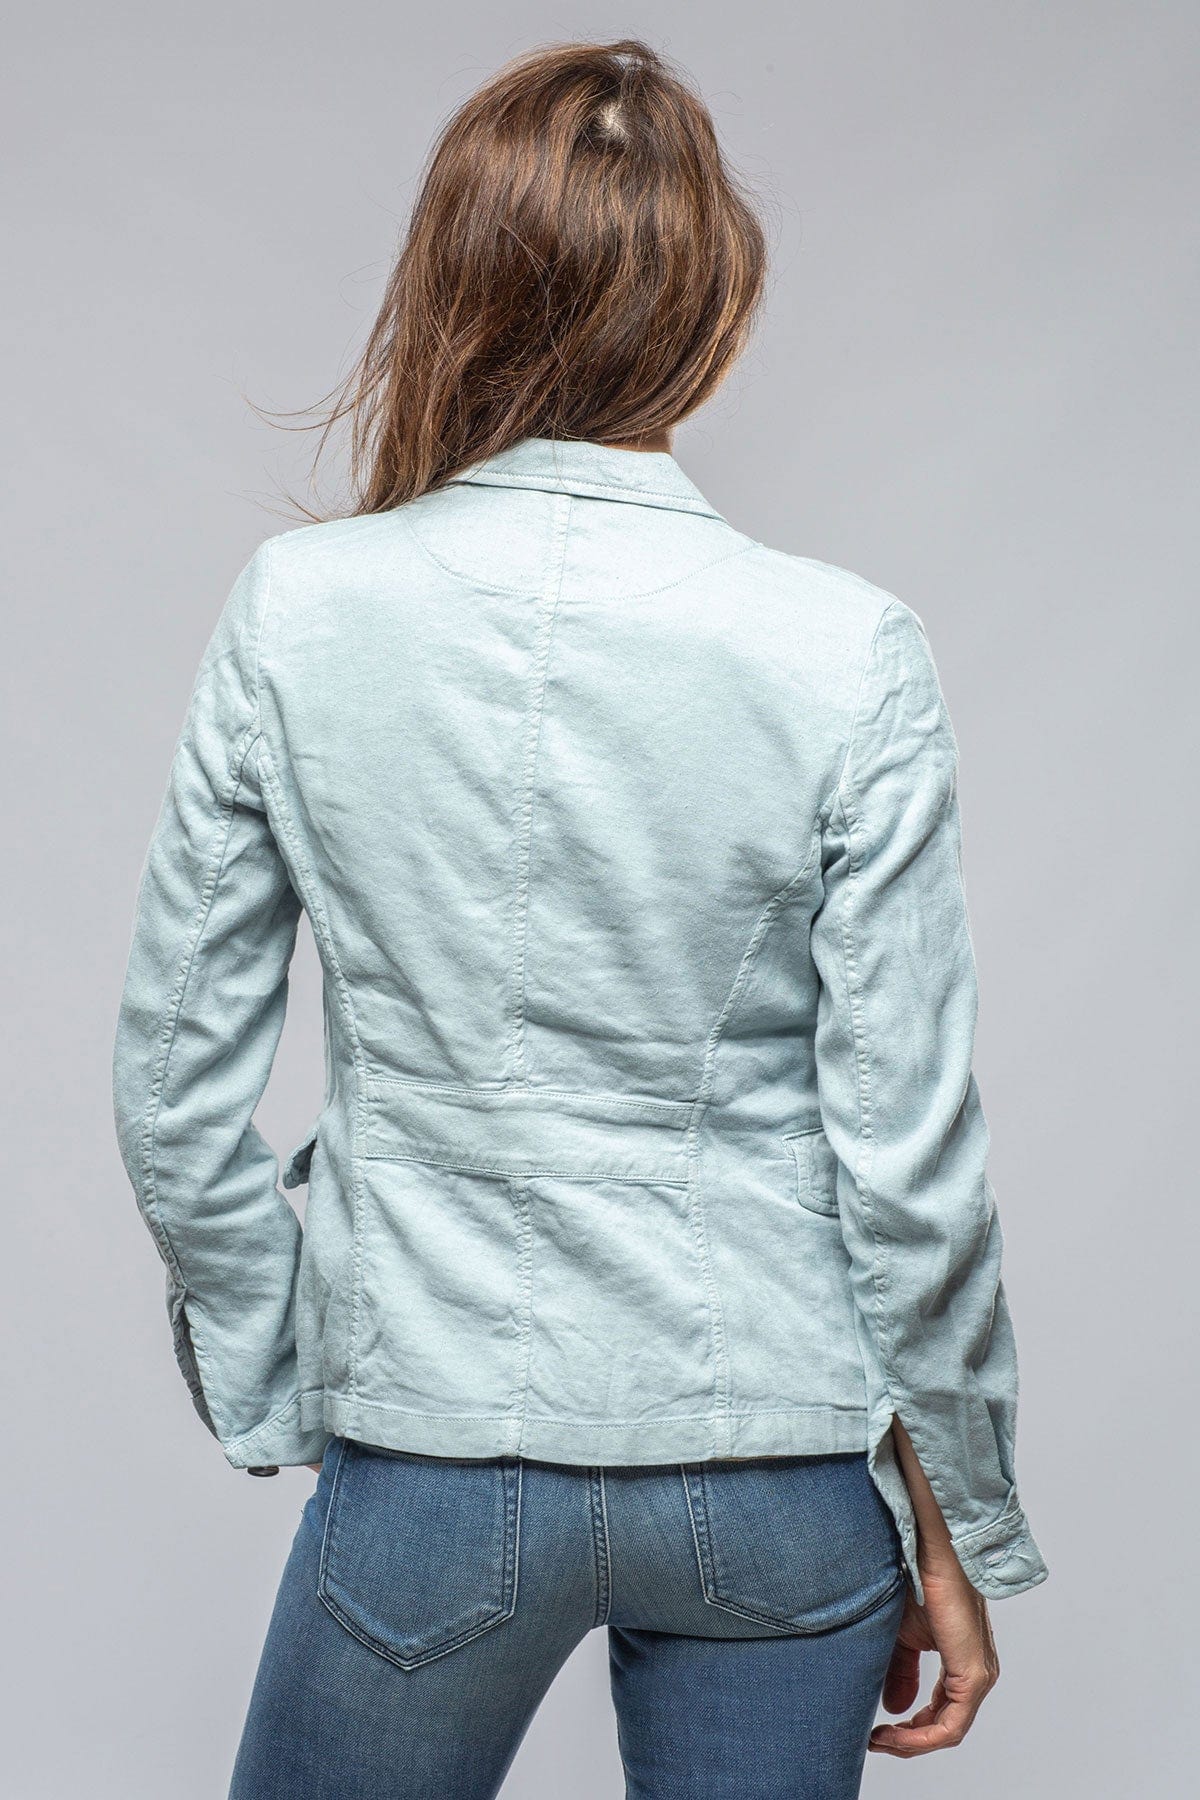 Chama Cotton Linen Washed Blazer Jacket In Blue Ice - AXEL'S